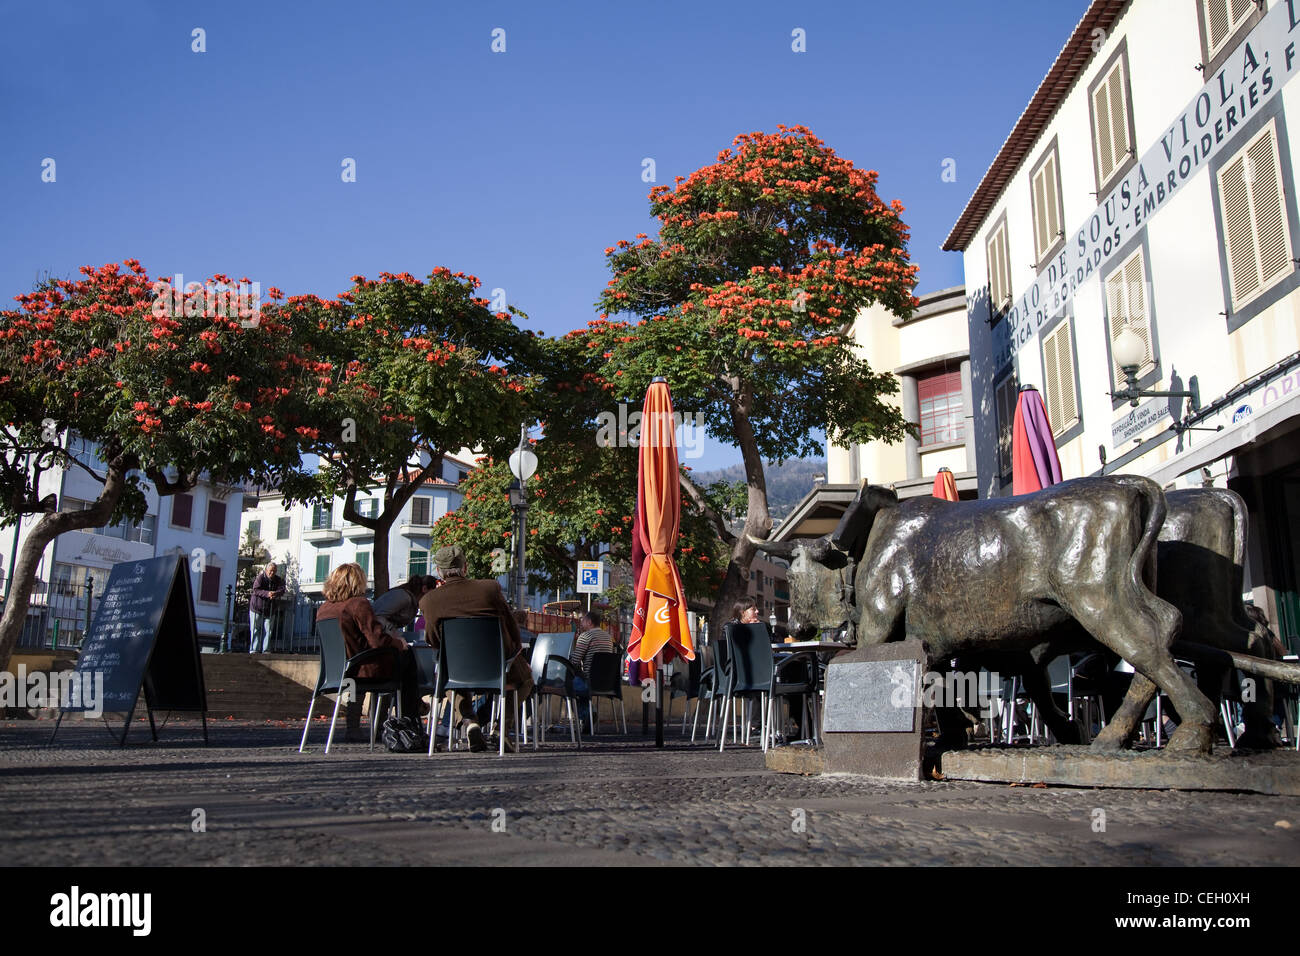 Pavement Cafe, Statue of oxen, Flamboyan Anaranjado flowering trees and Restaurant in Funchal, Madeira, Portugal. Stock Photo